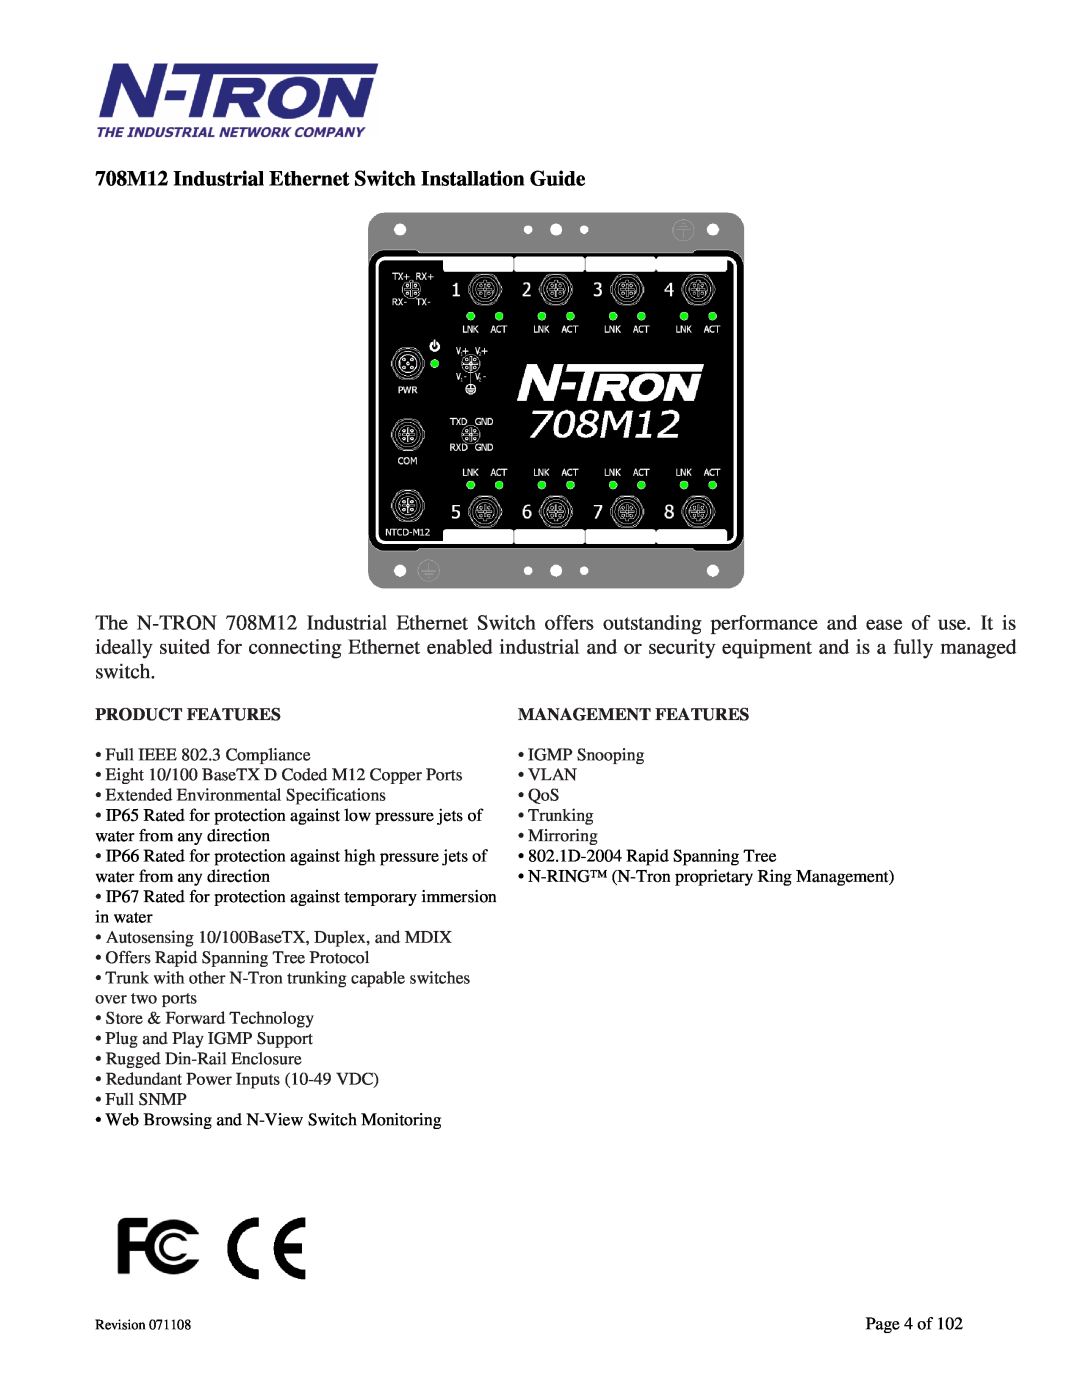 N-Tron user manual 708M12 Industrial Ethernet Switch Installation Guide, Product Features, Management Features 